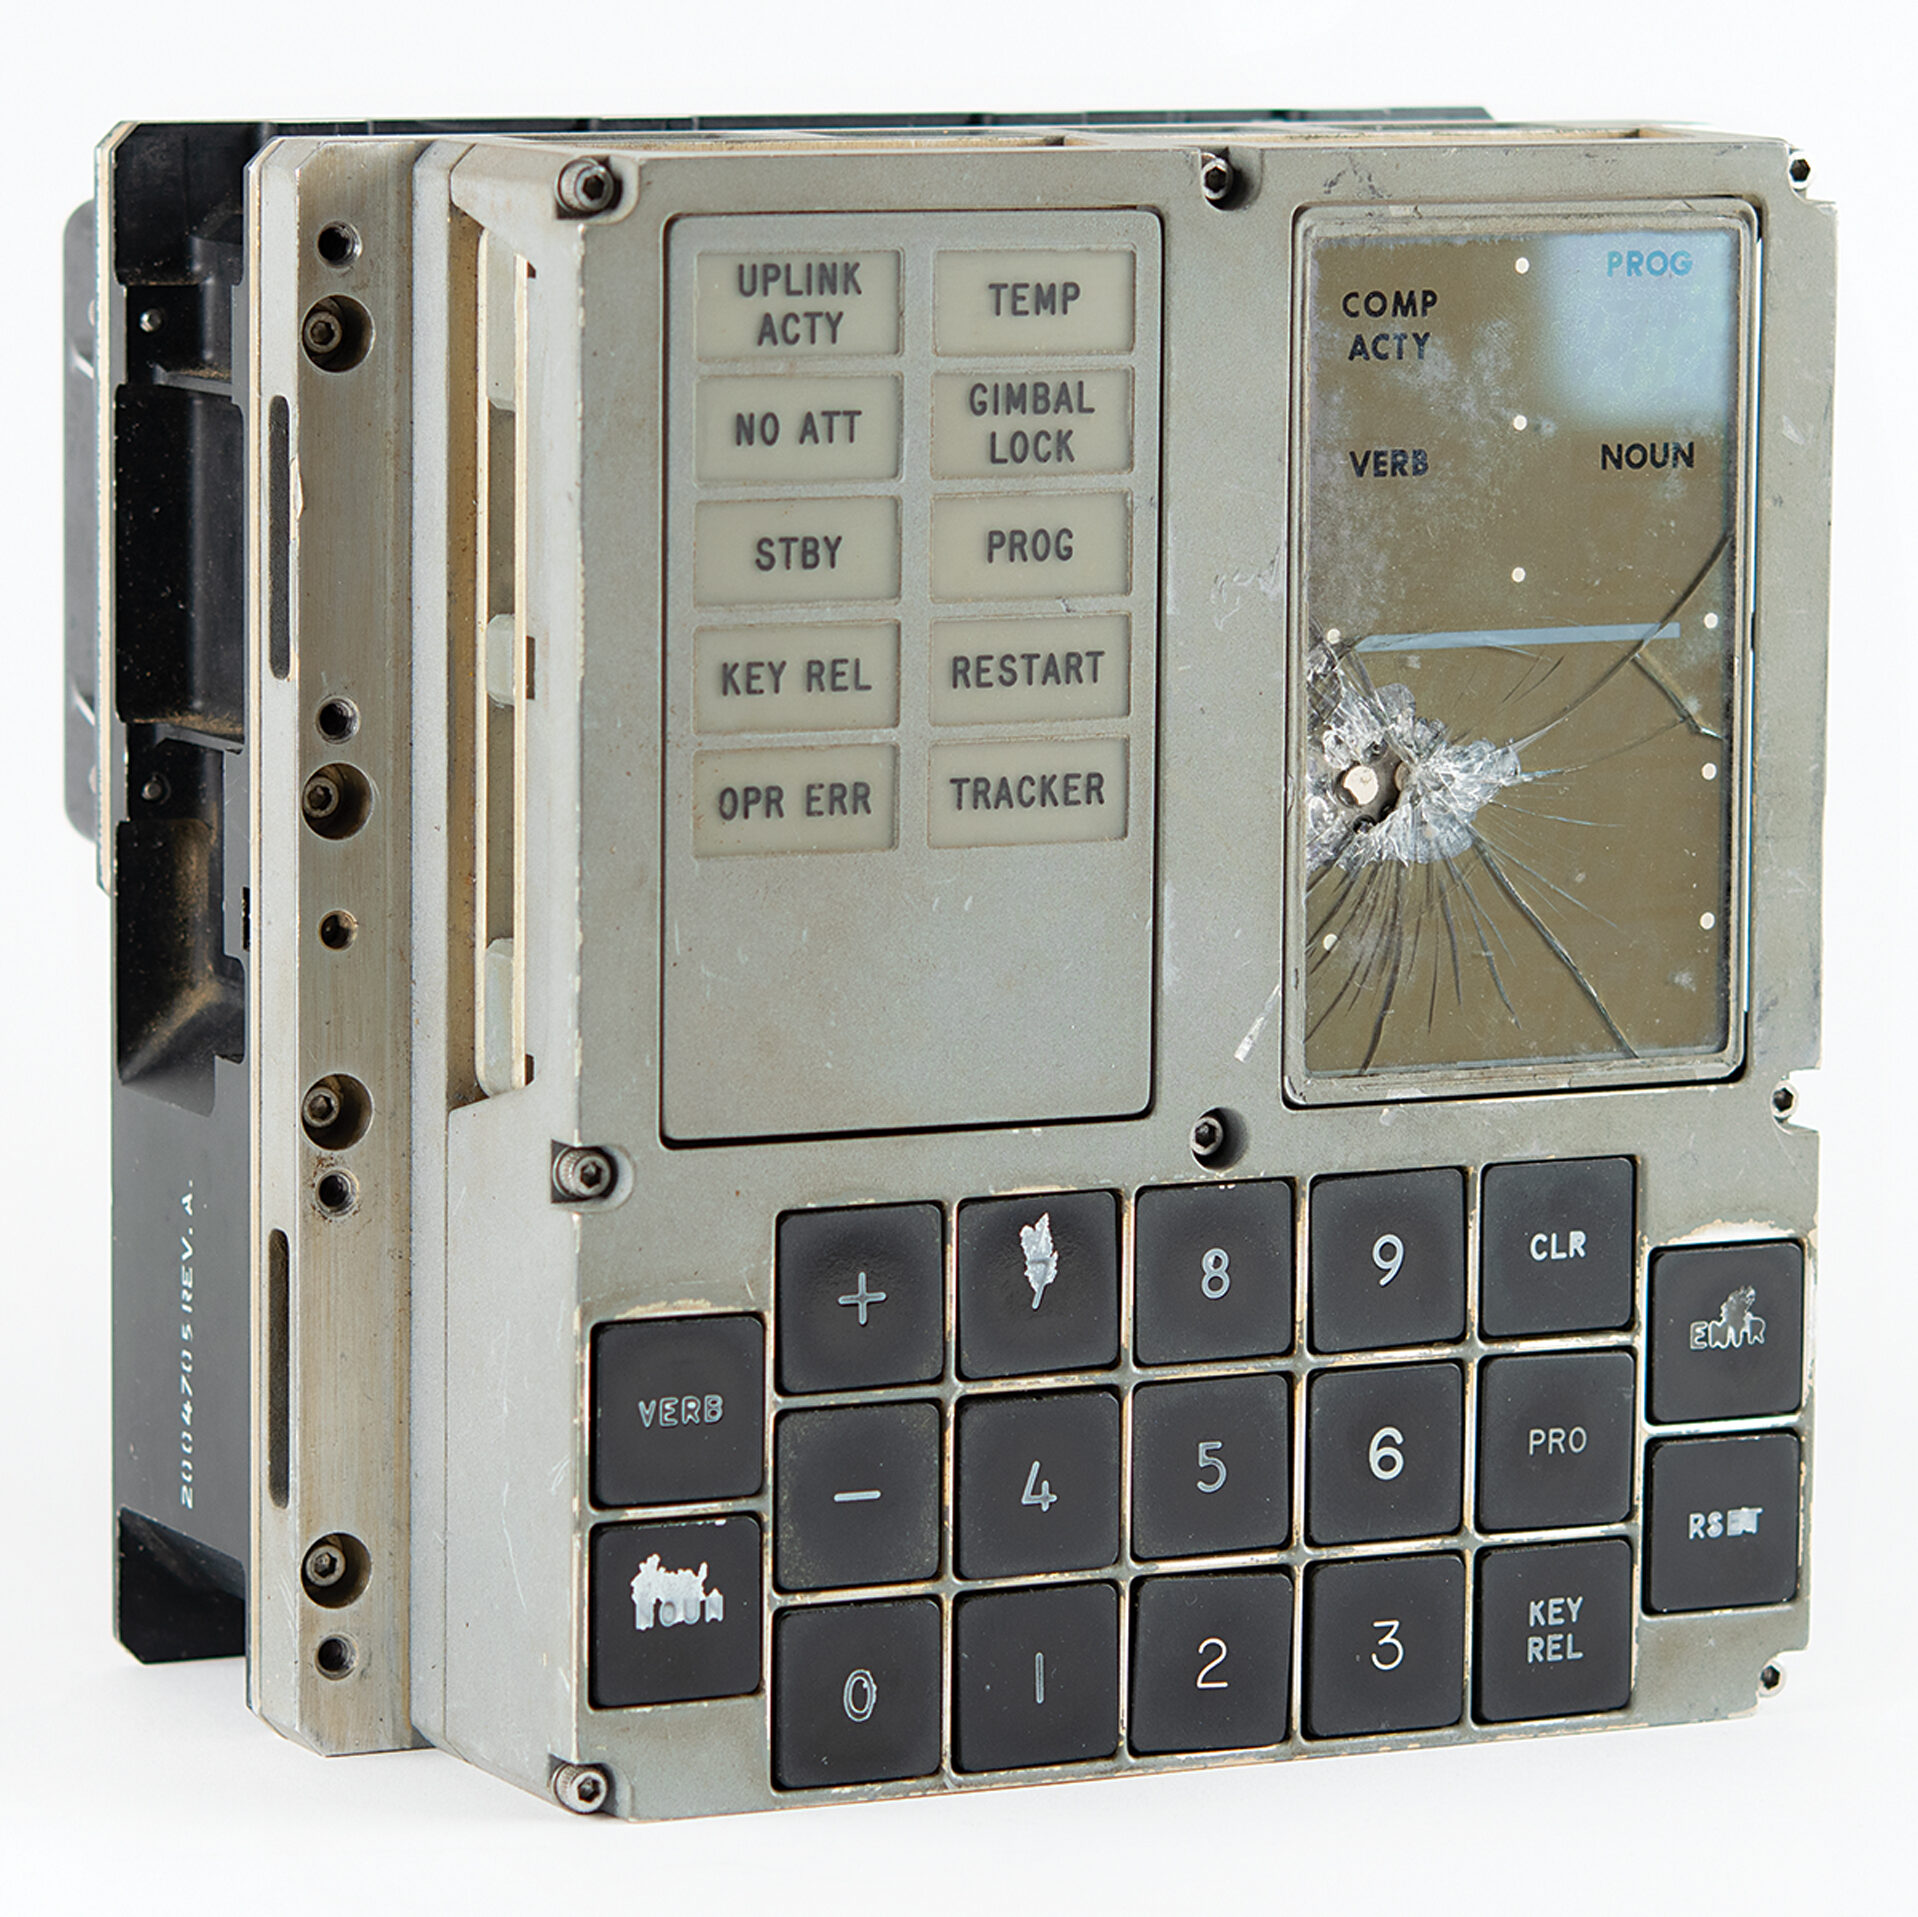 This Apollo display and keyboard assembly was used by astronauts to directly communicate with the onboard guidance computer.